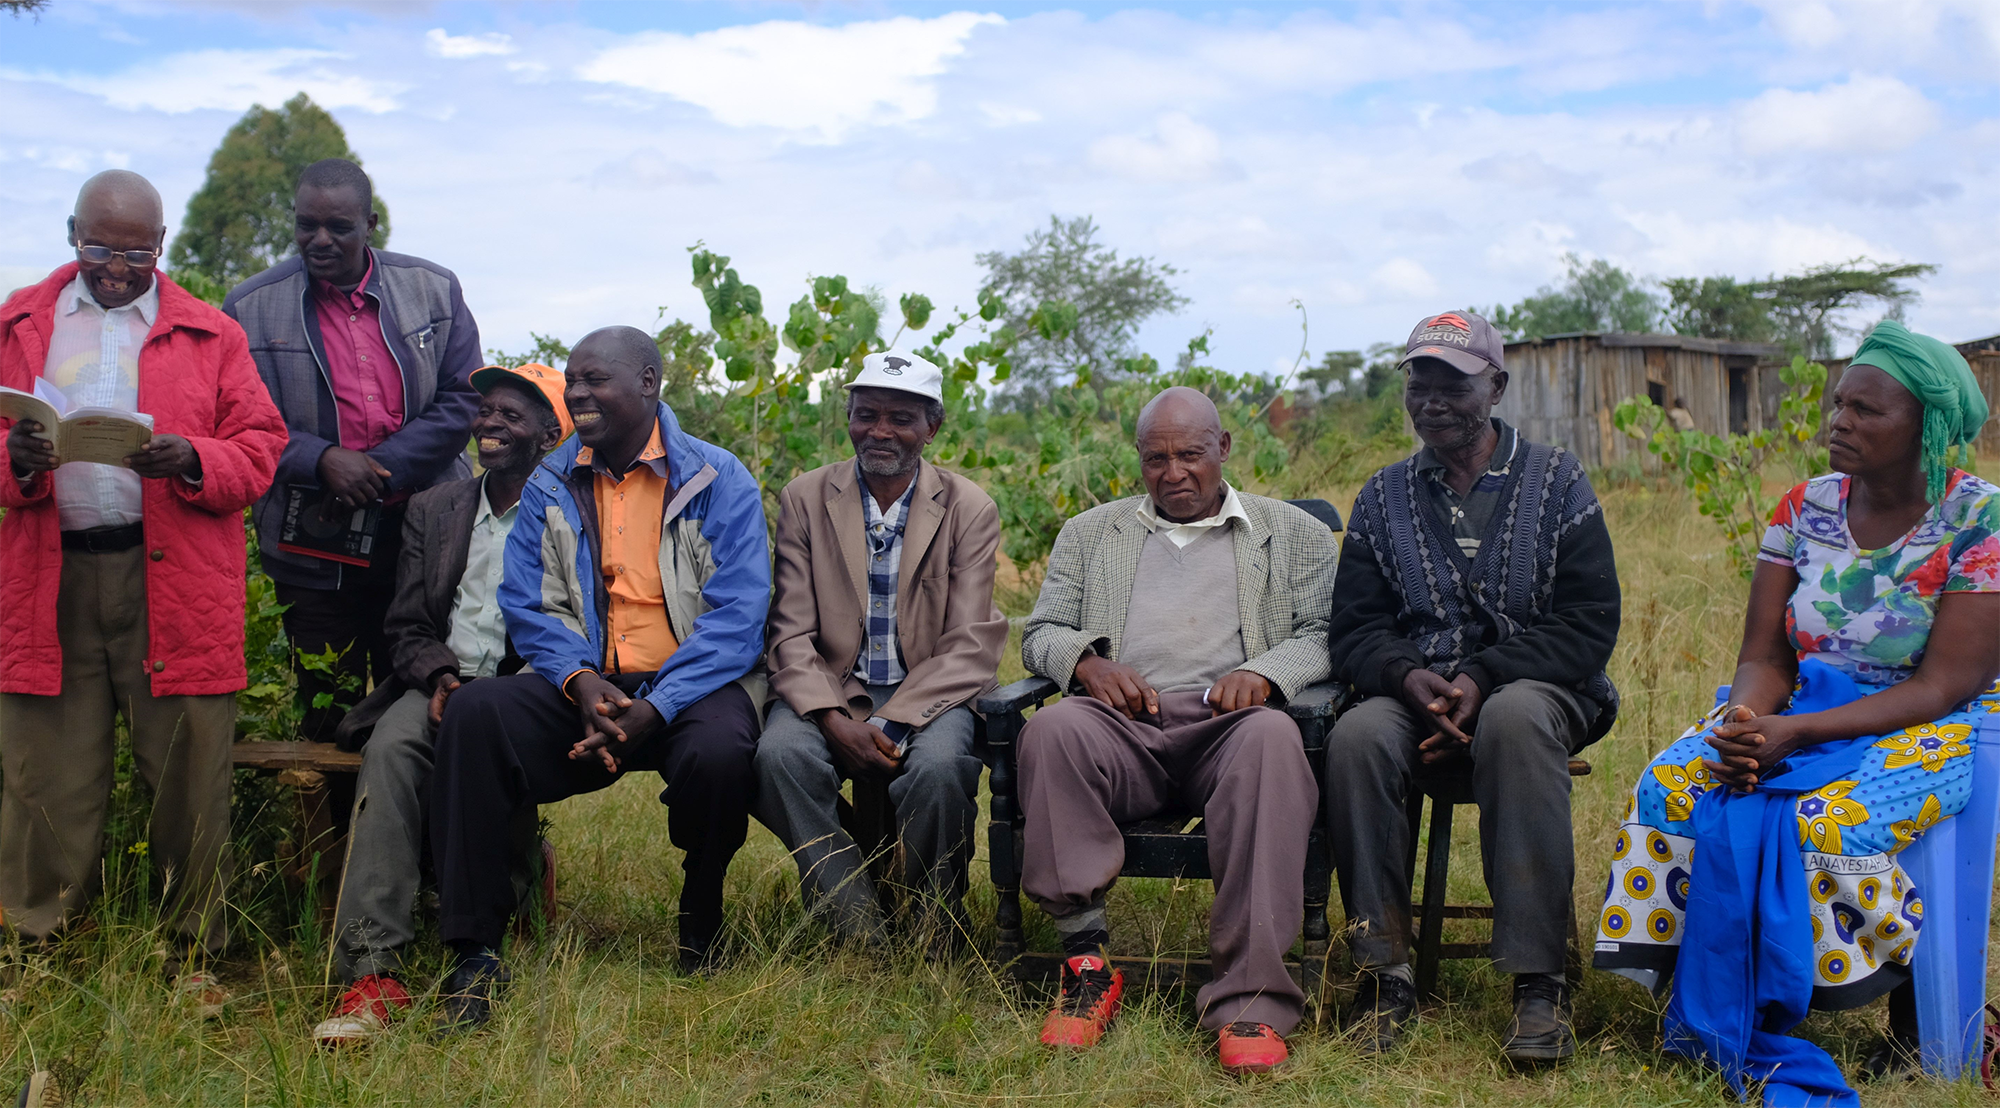 The role of community-based conflict resolution in Kenya